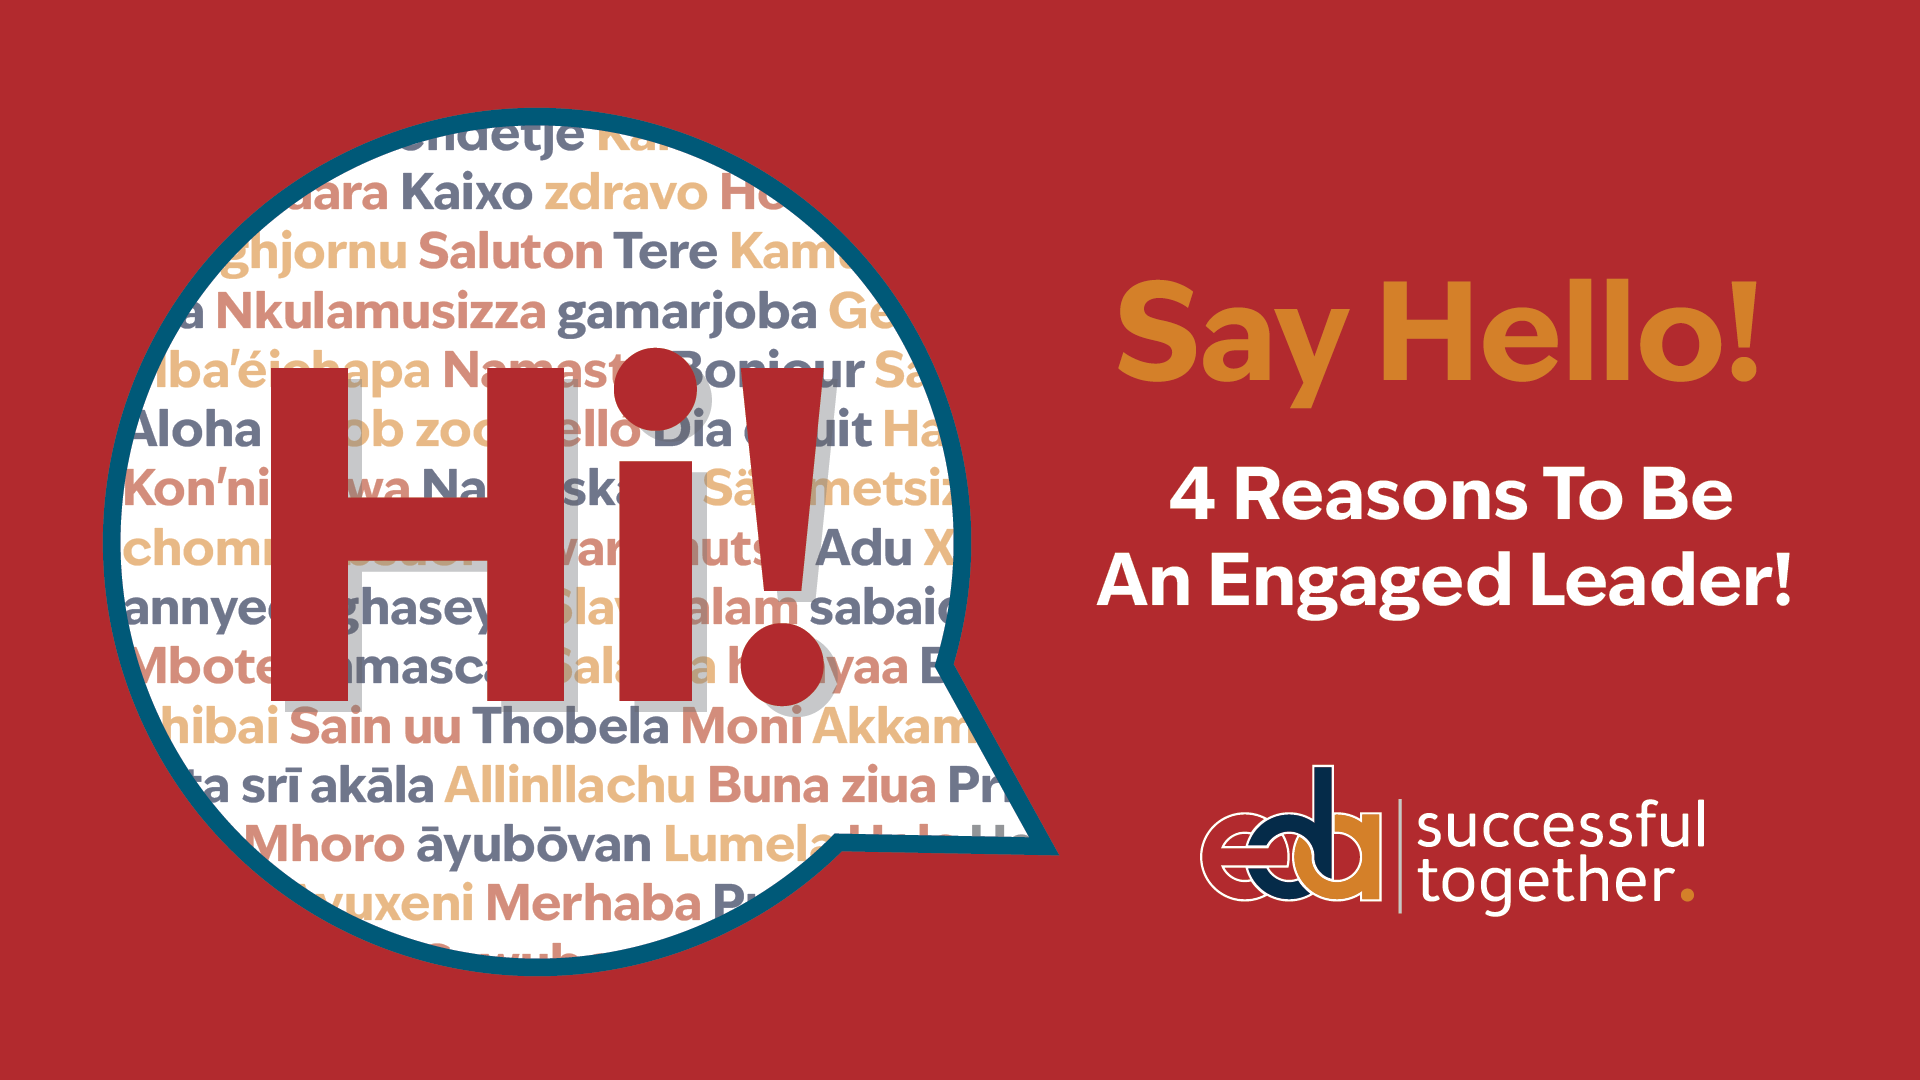 Say Hello! 4 Reasons To Be An Engaged Leader!